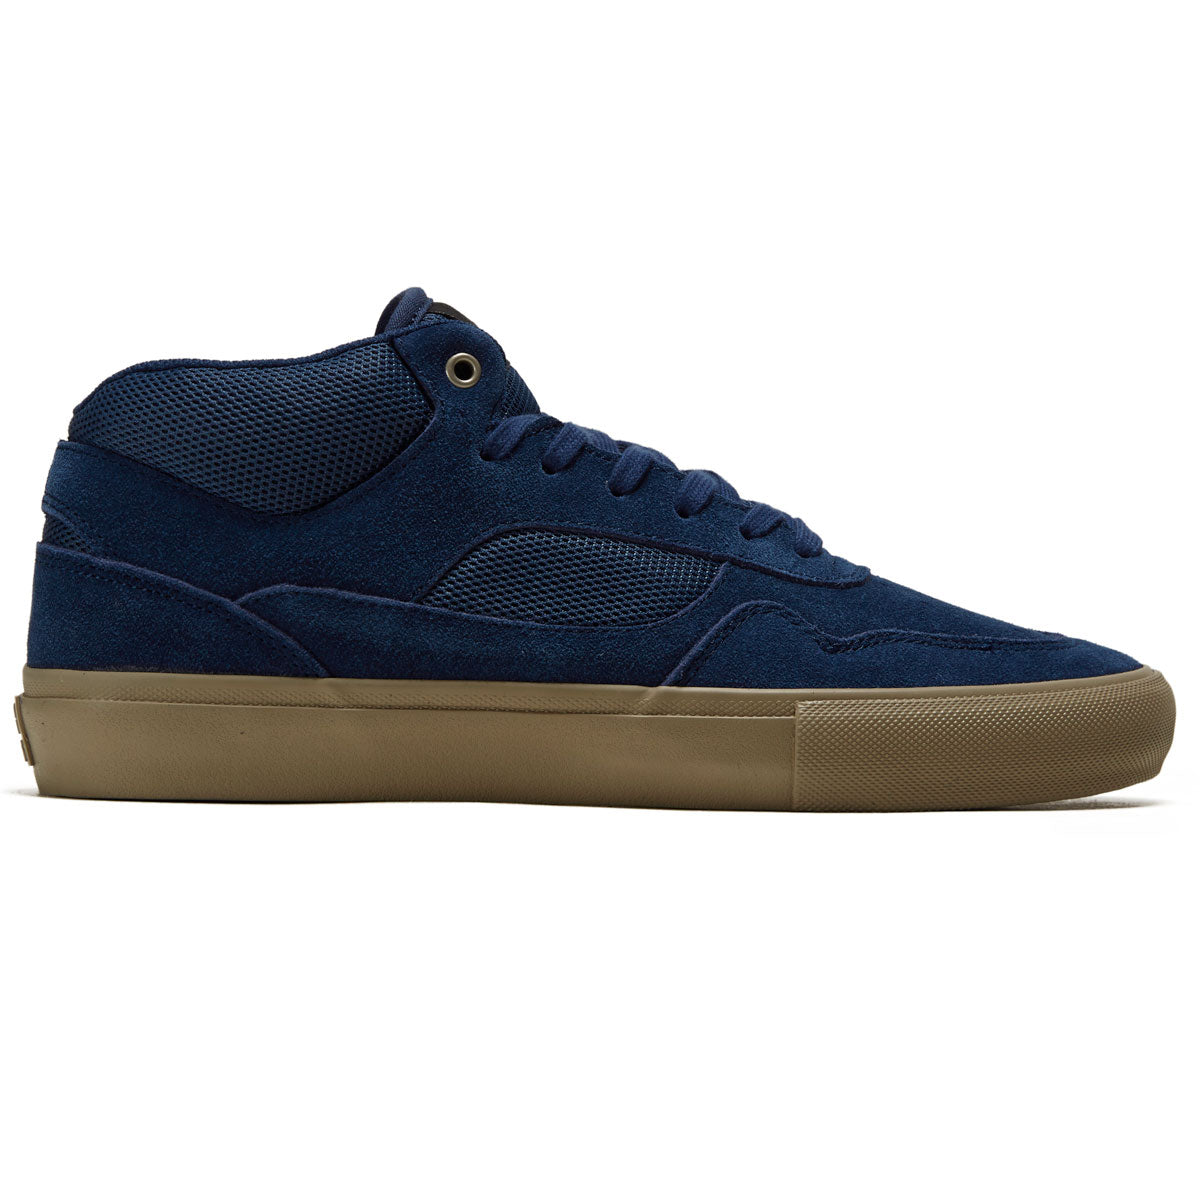 Opus Standard Mid Shoes - Navy/Cream image 1